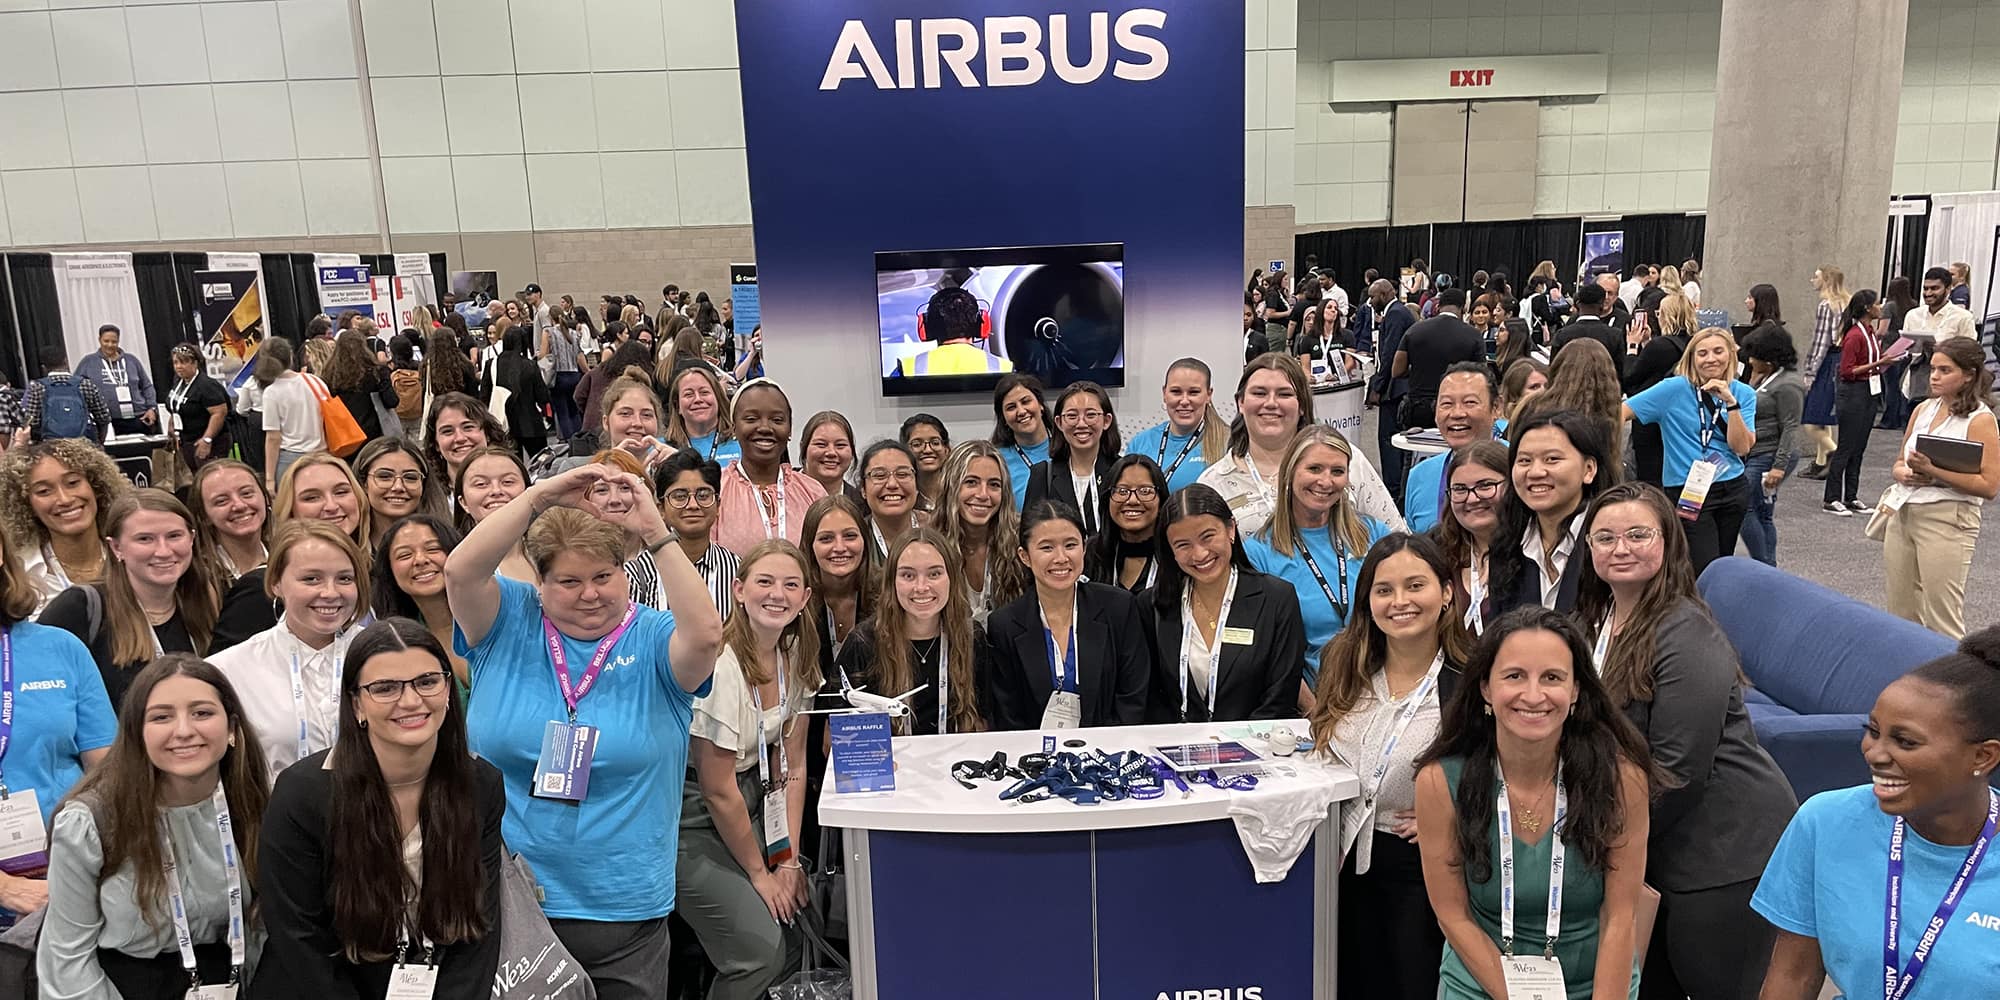 About two dozen, mostly women, pose around the Airbus booth in an expo hall, smiling at the camera. A couple people hold up a heart sign made with their hands.